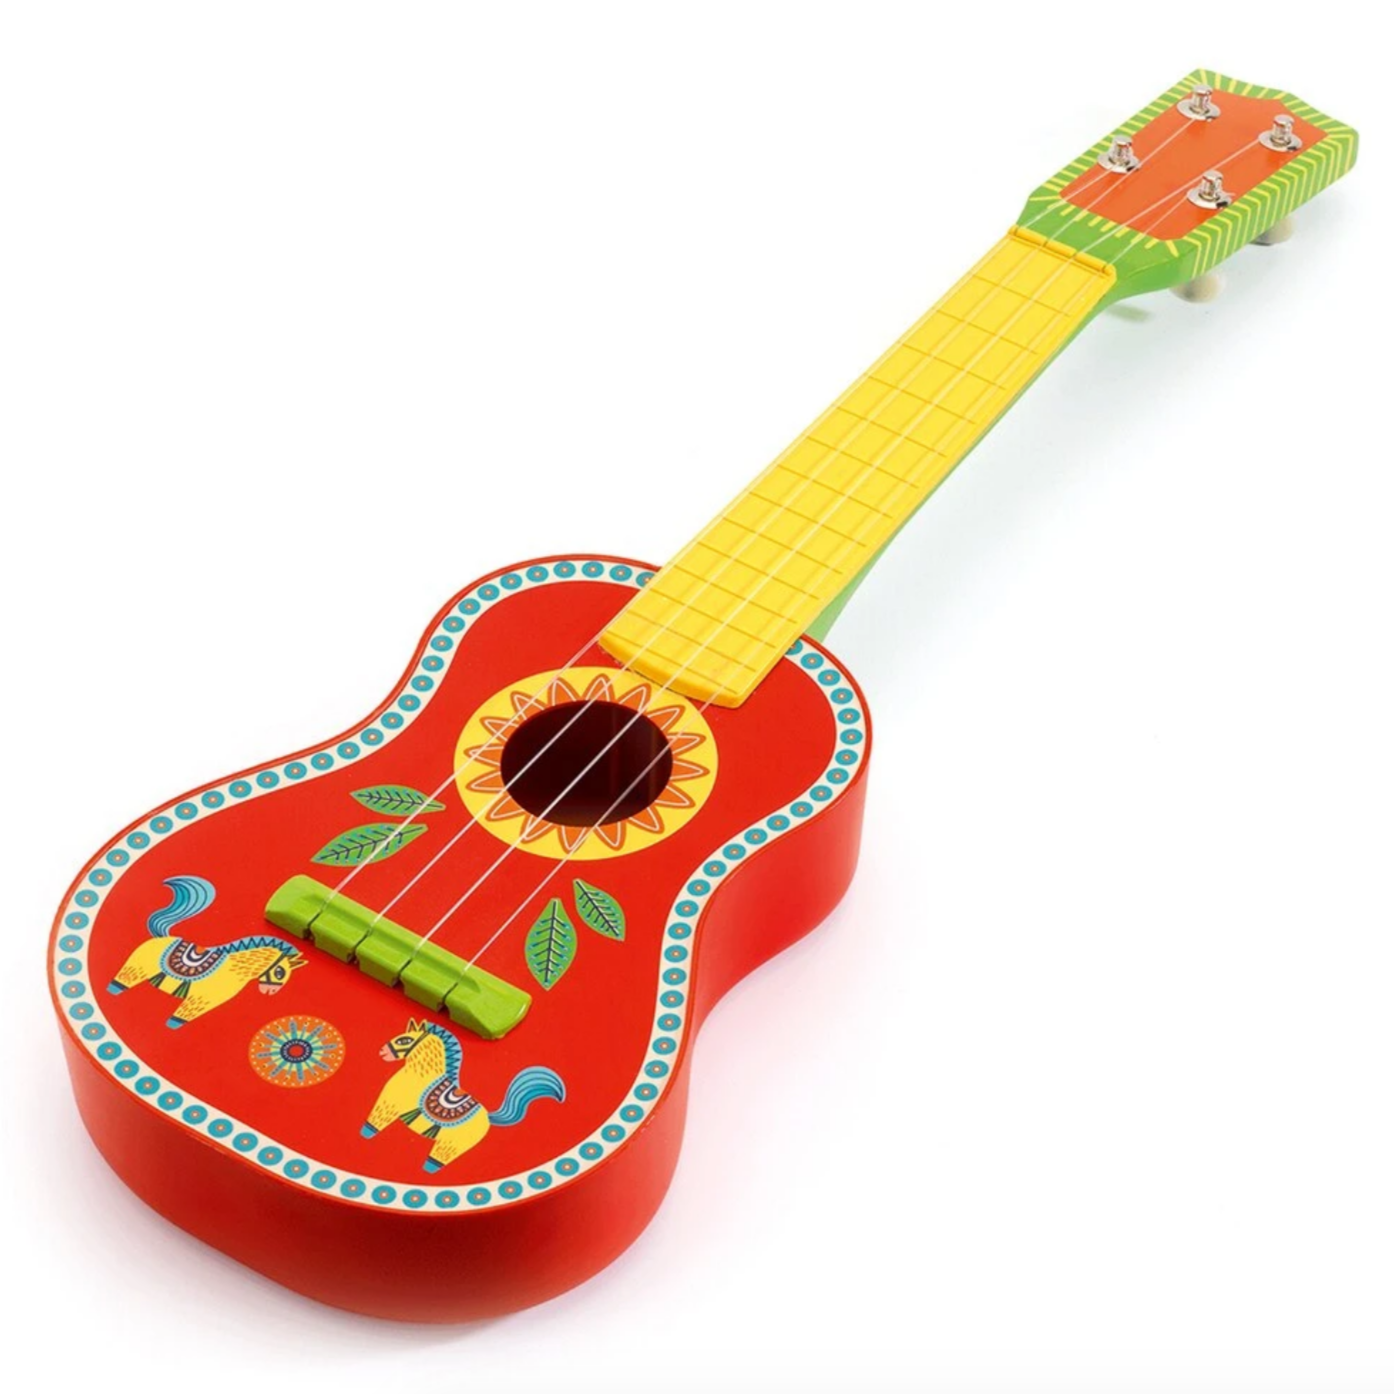 red ukulele with painted horses and leaves